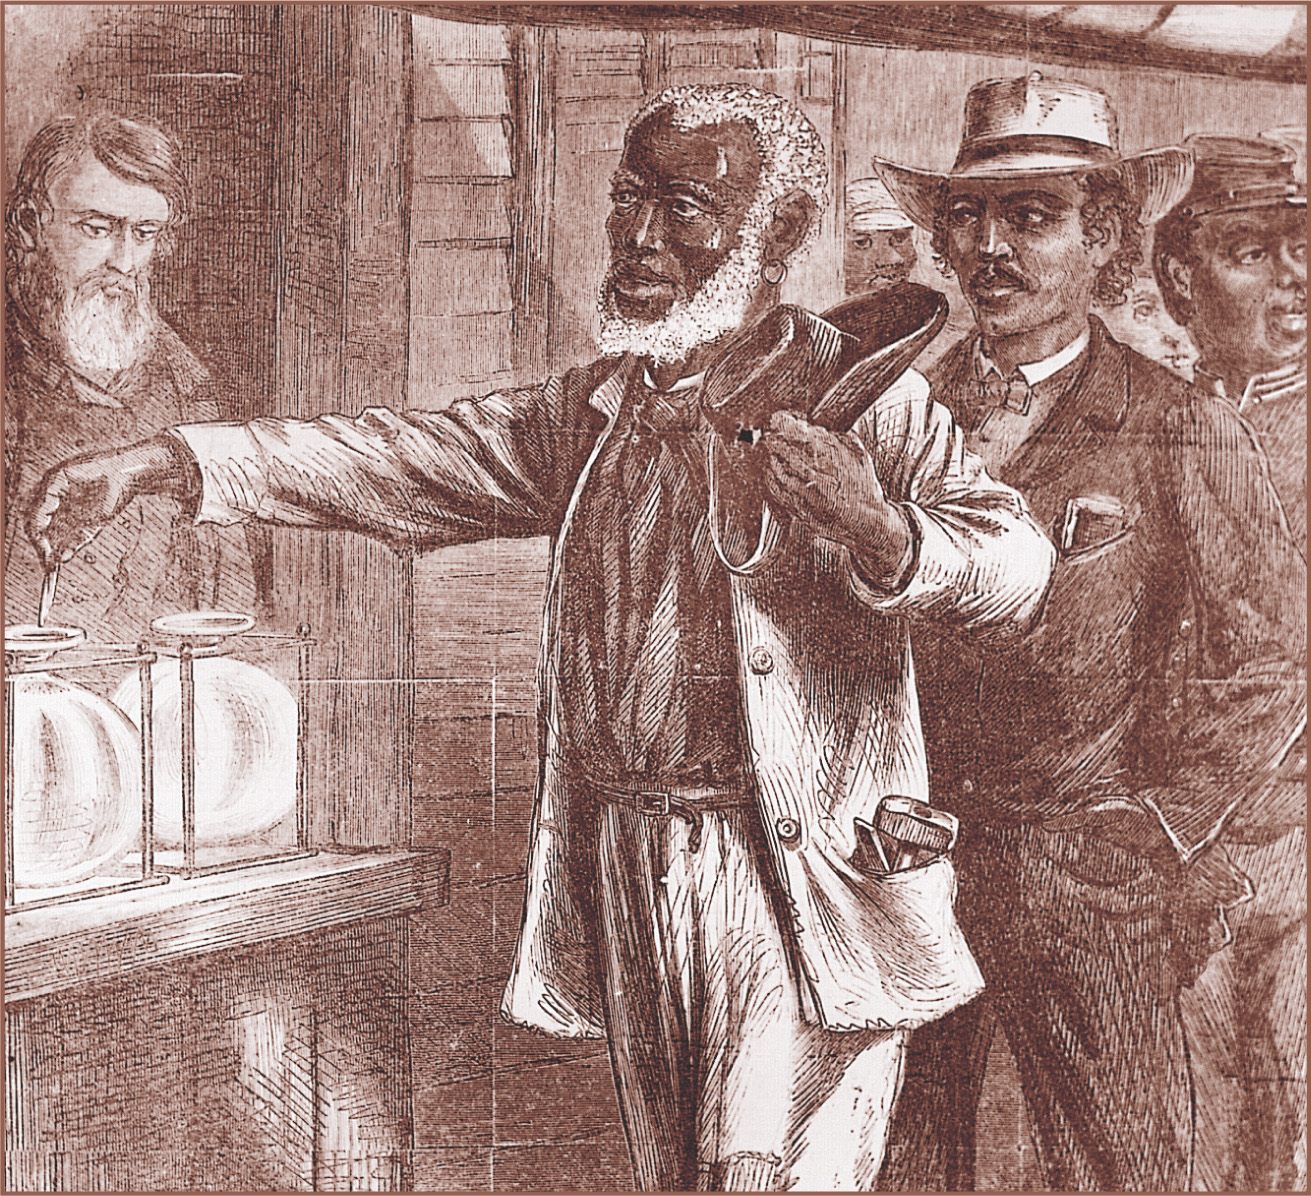 In a drawing,
an African-American man drops a slip of paper into a jar.